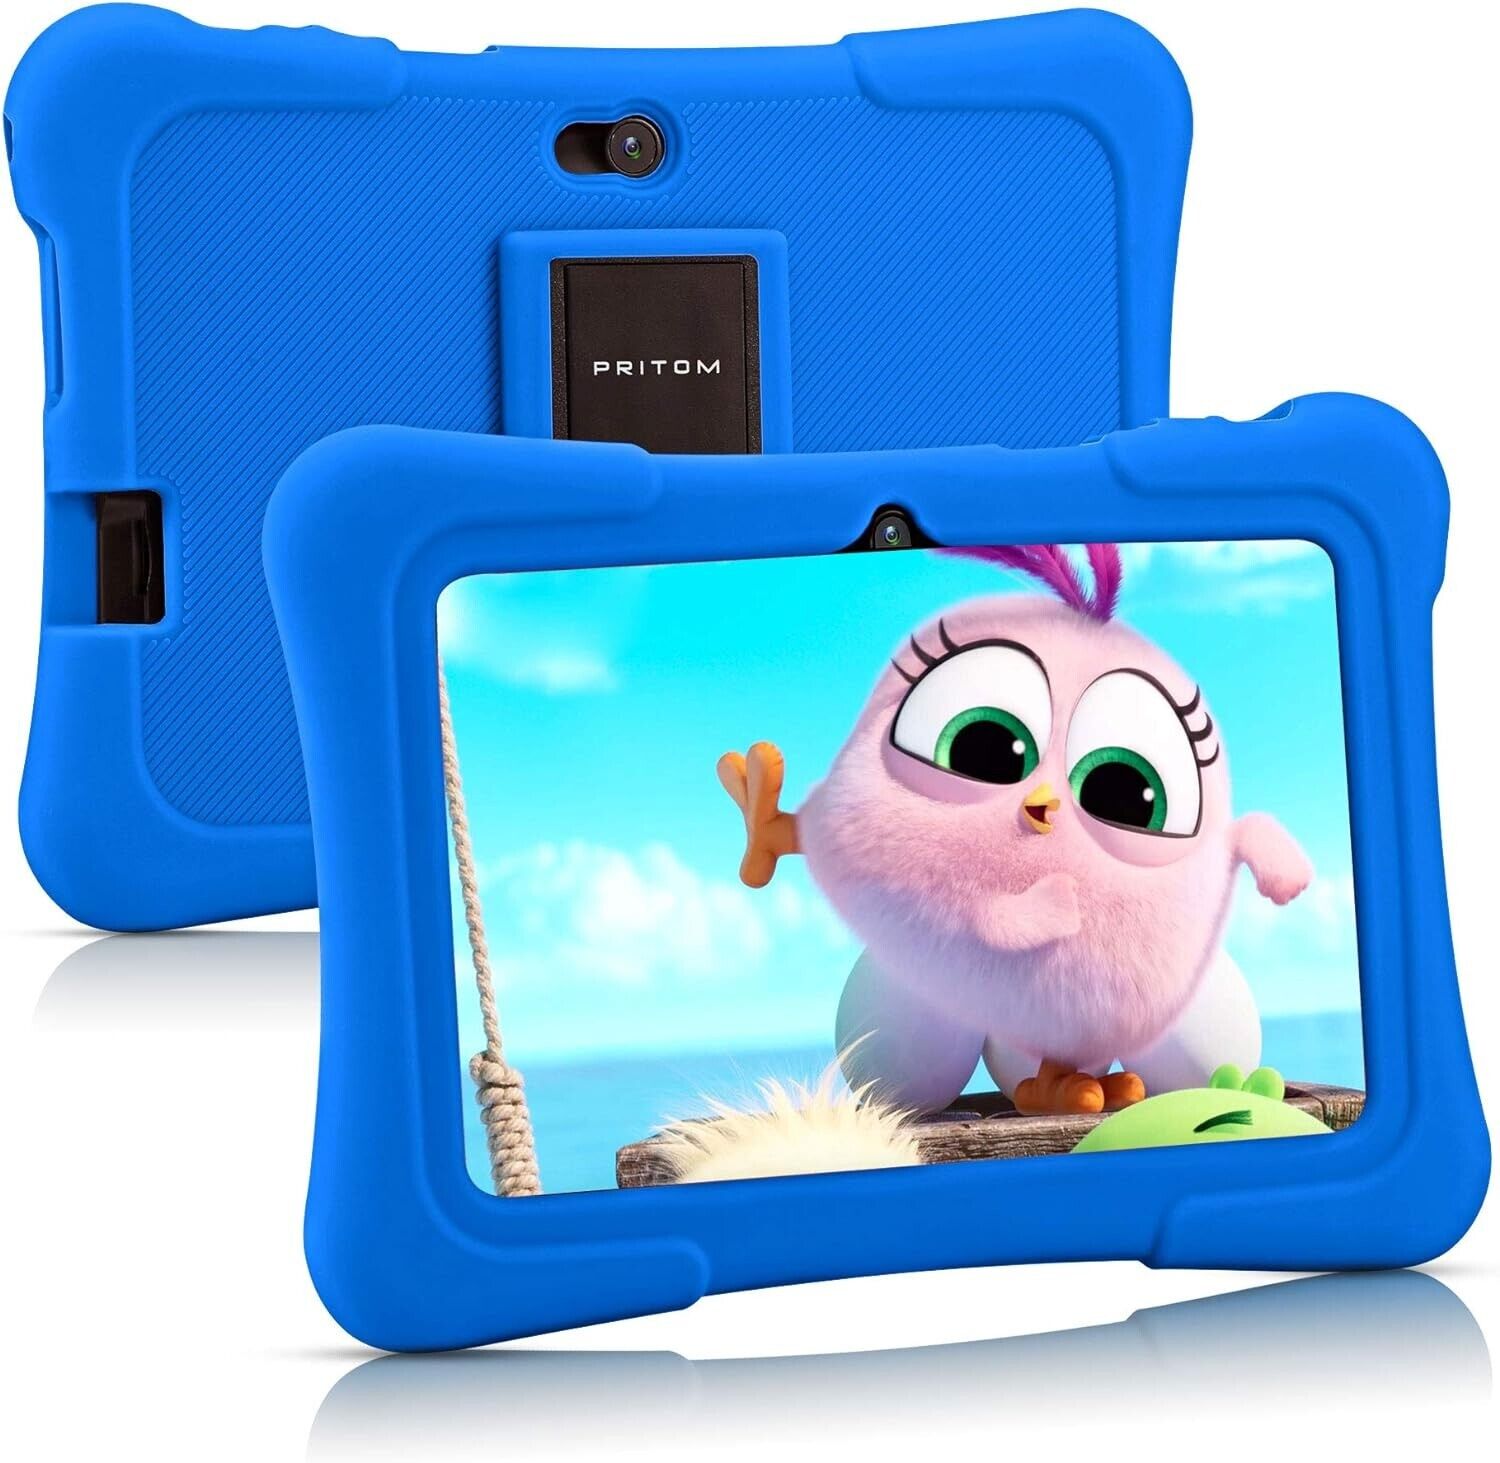 Pritom K7 Kids Android Tablet PC With Quad Core Processor and 7 Inch Display